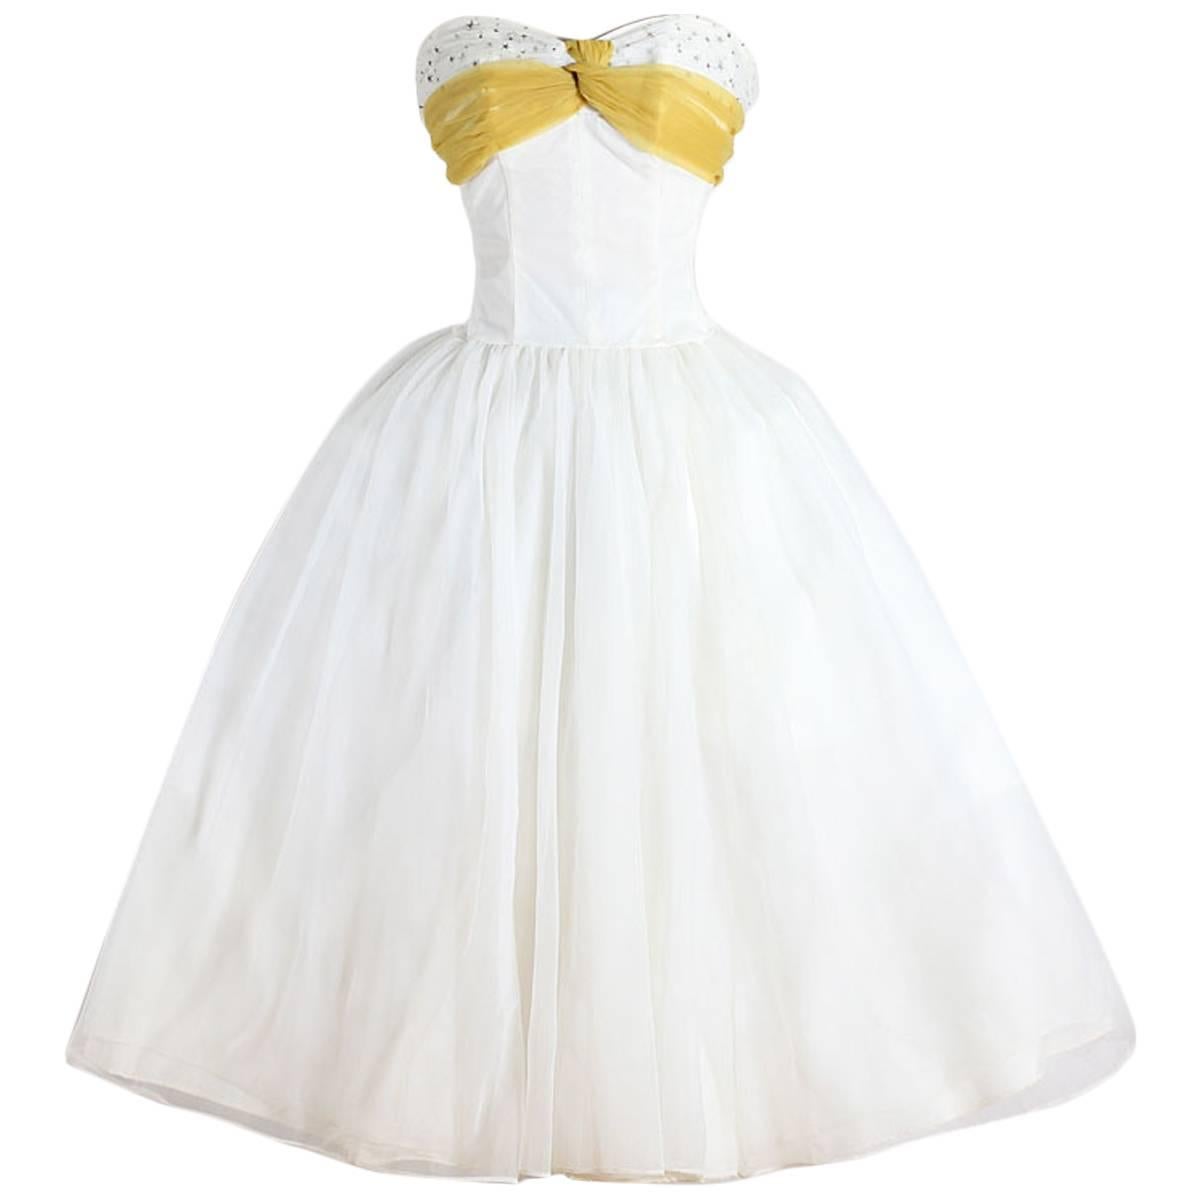 Vintage 1950s White Yellow Star Chiffon Party Dress For Sale